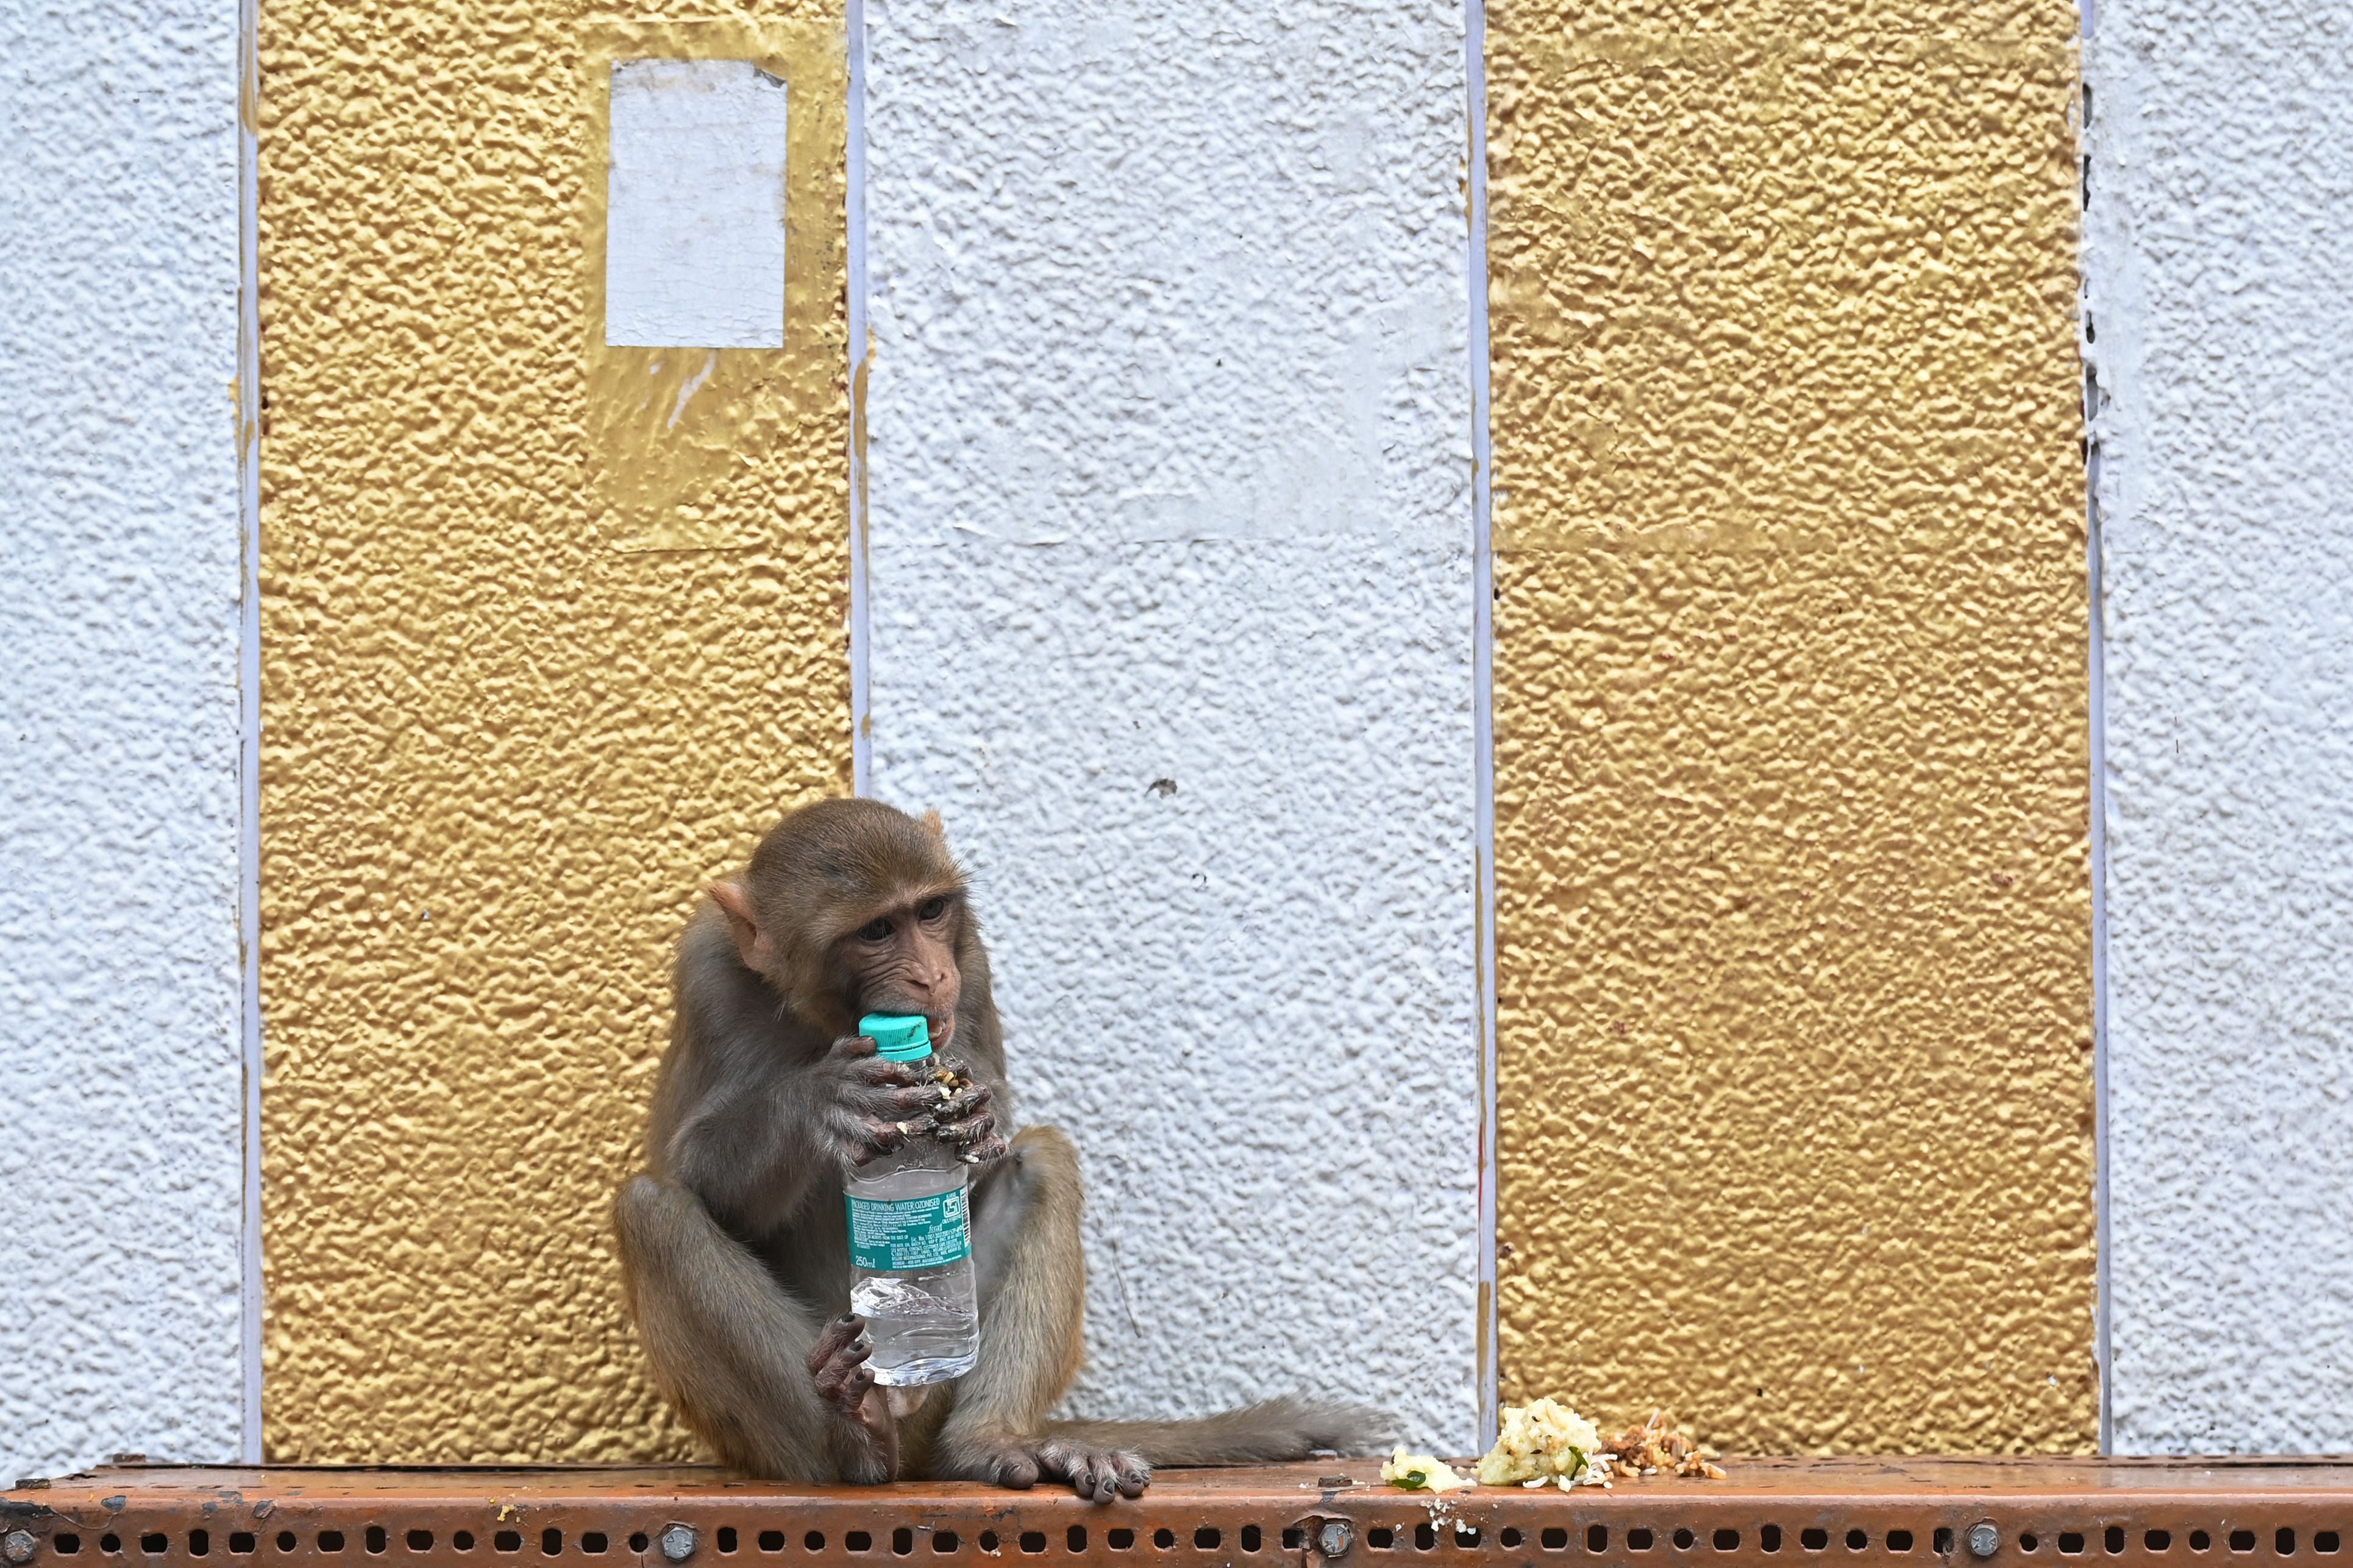 A monkey reportedly first snatched a bundle of notes and then showered it on the road